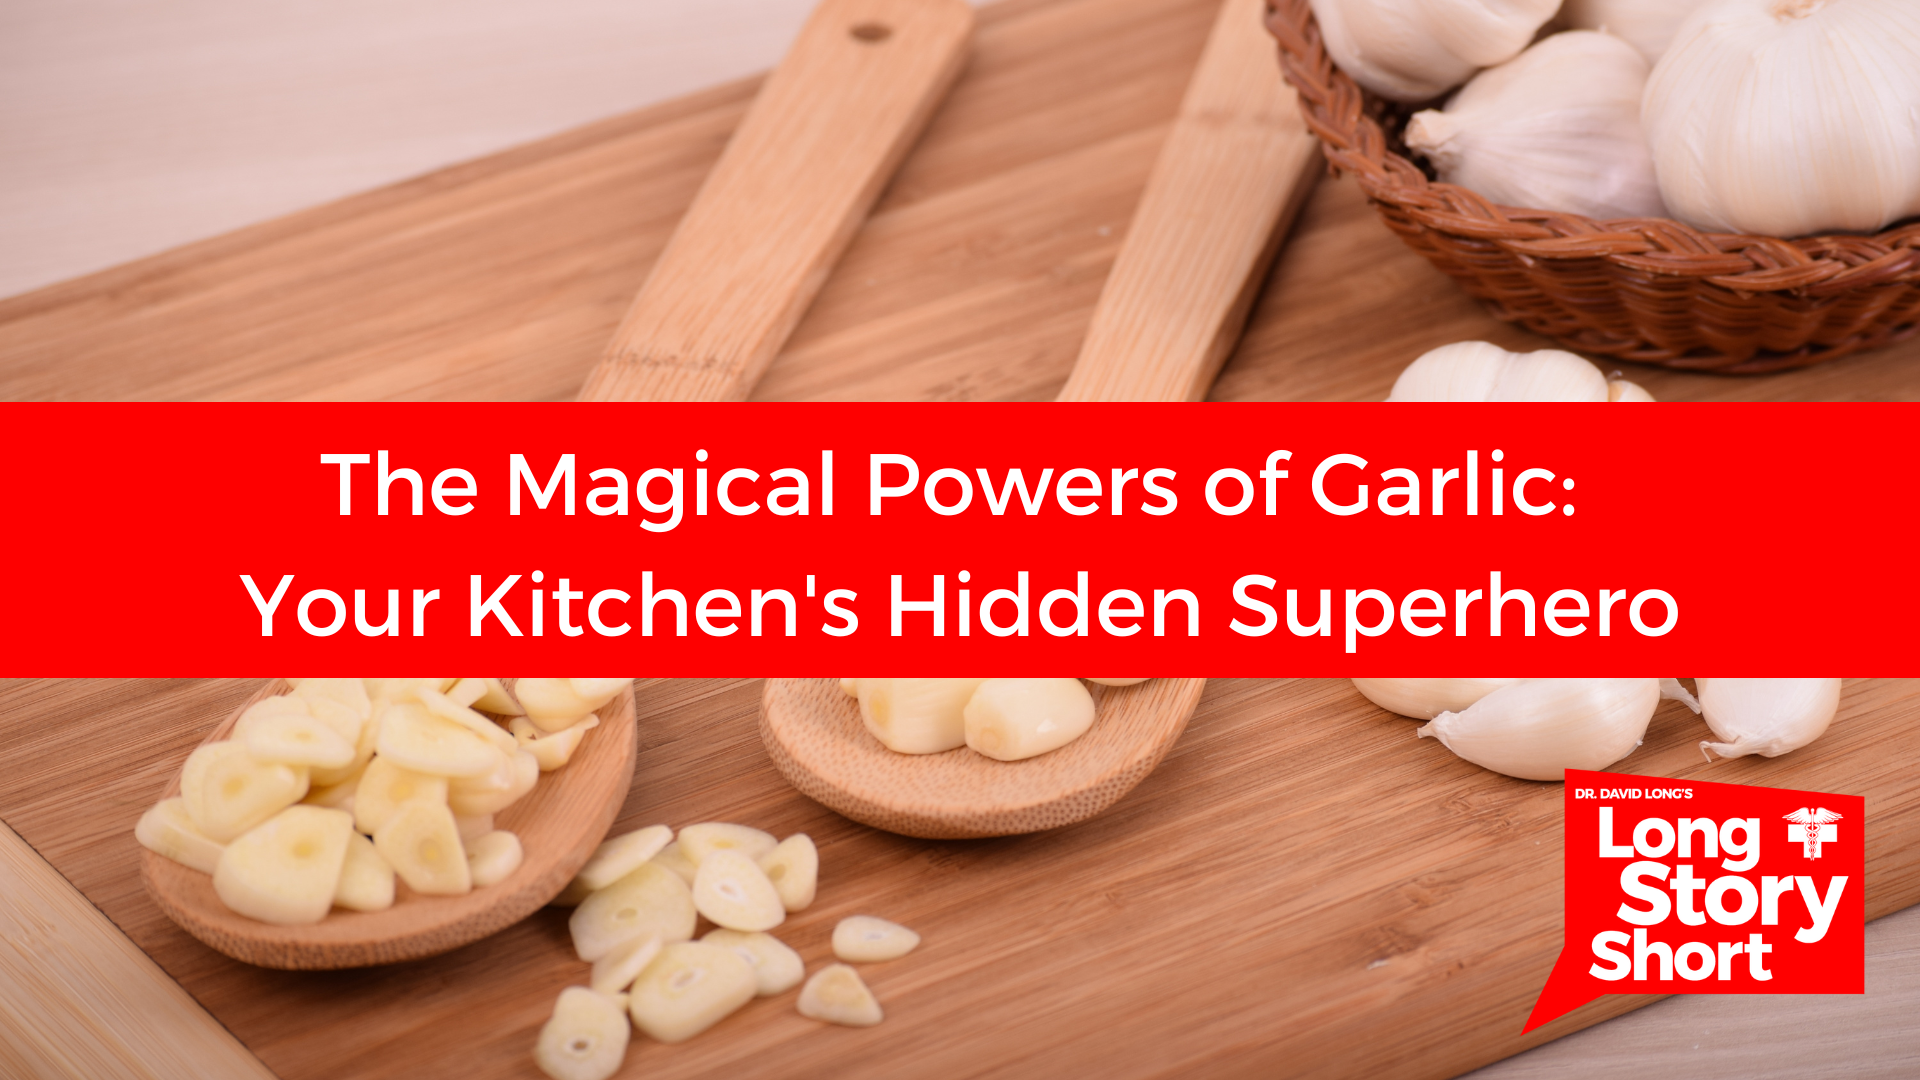 You are currently viewing The Magical Powers of Garlic: Your Kitchen’s Hidden Superhero